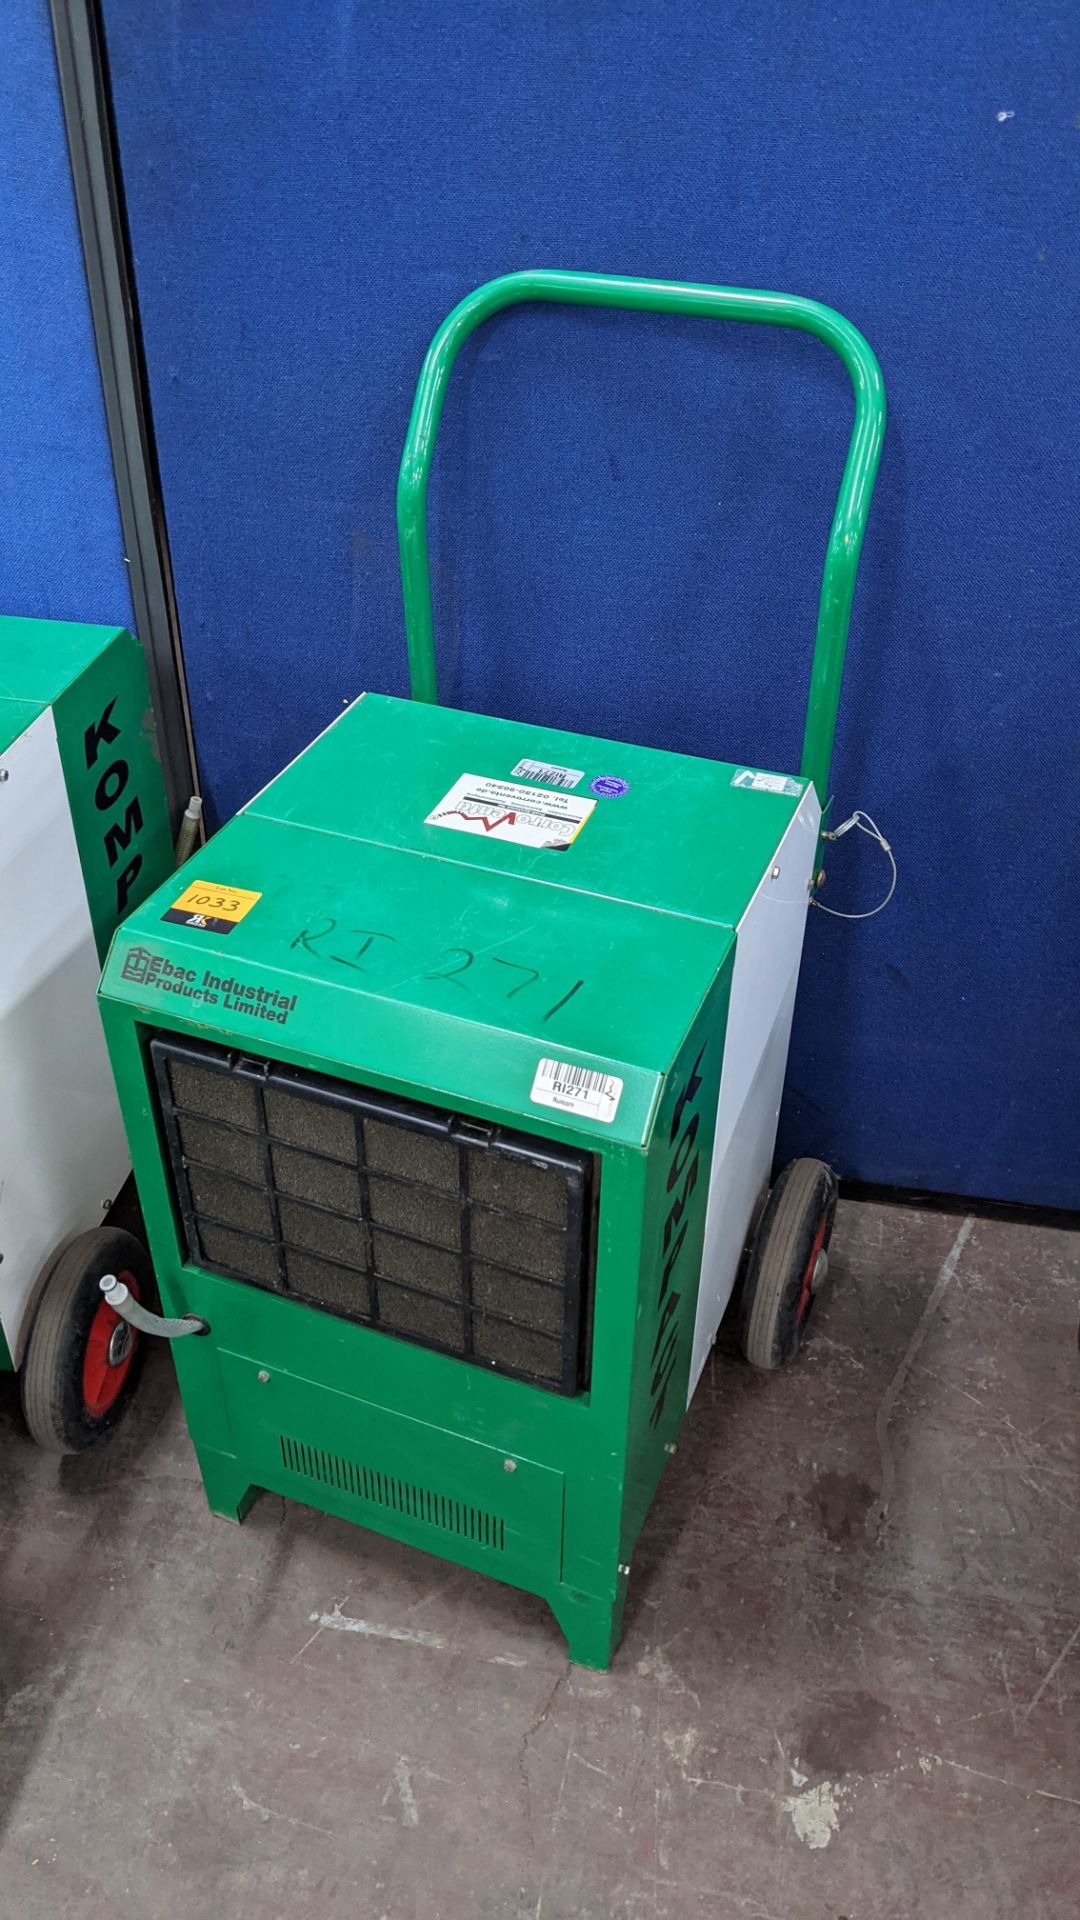 Ebac Industrial Products Limited Kompact industrial dehumidifier. 8,065 recorded hours